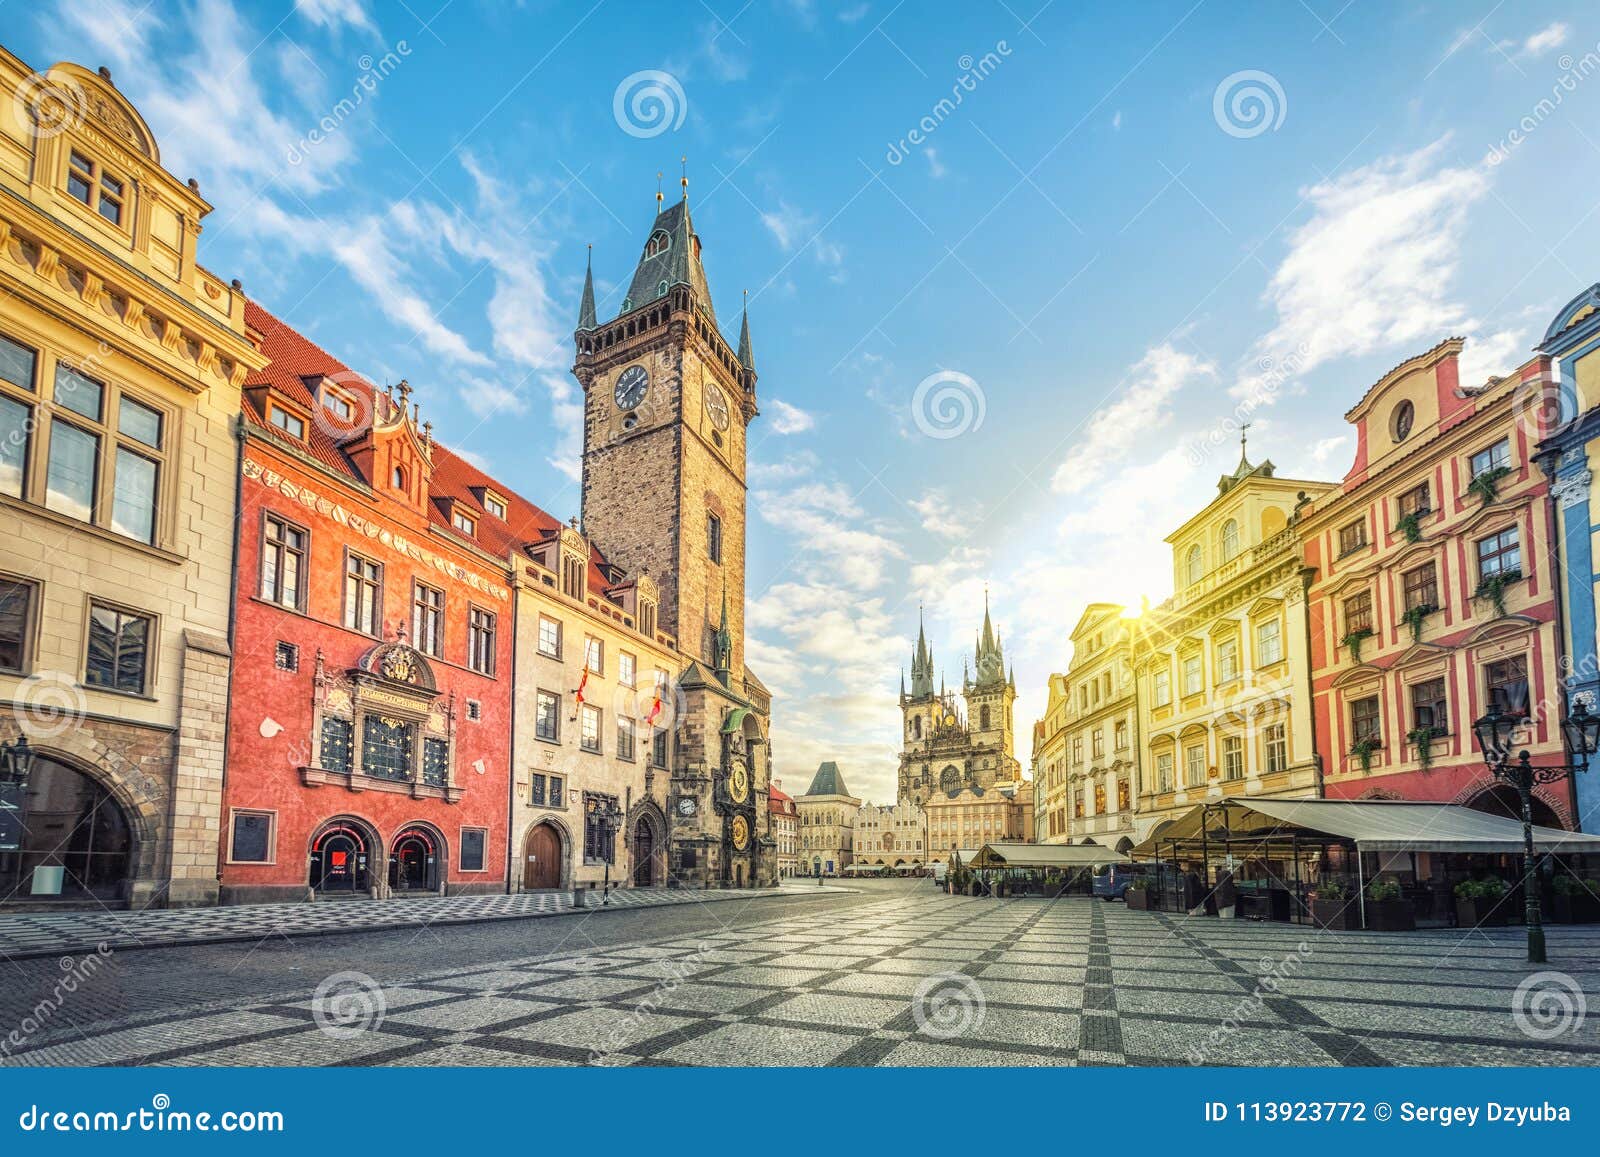 old town hall building with clock tower in prague